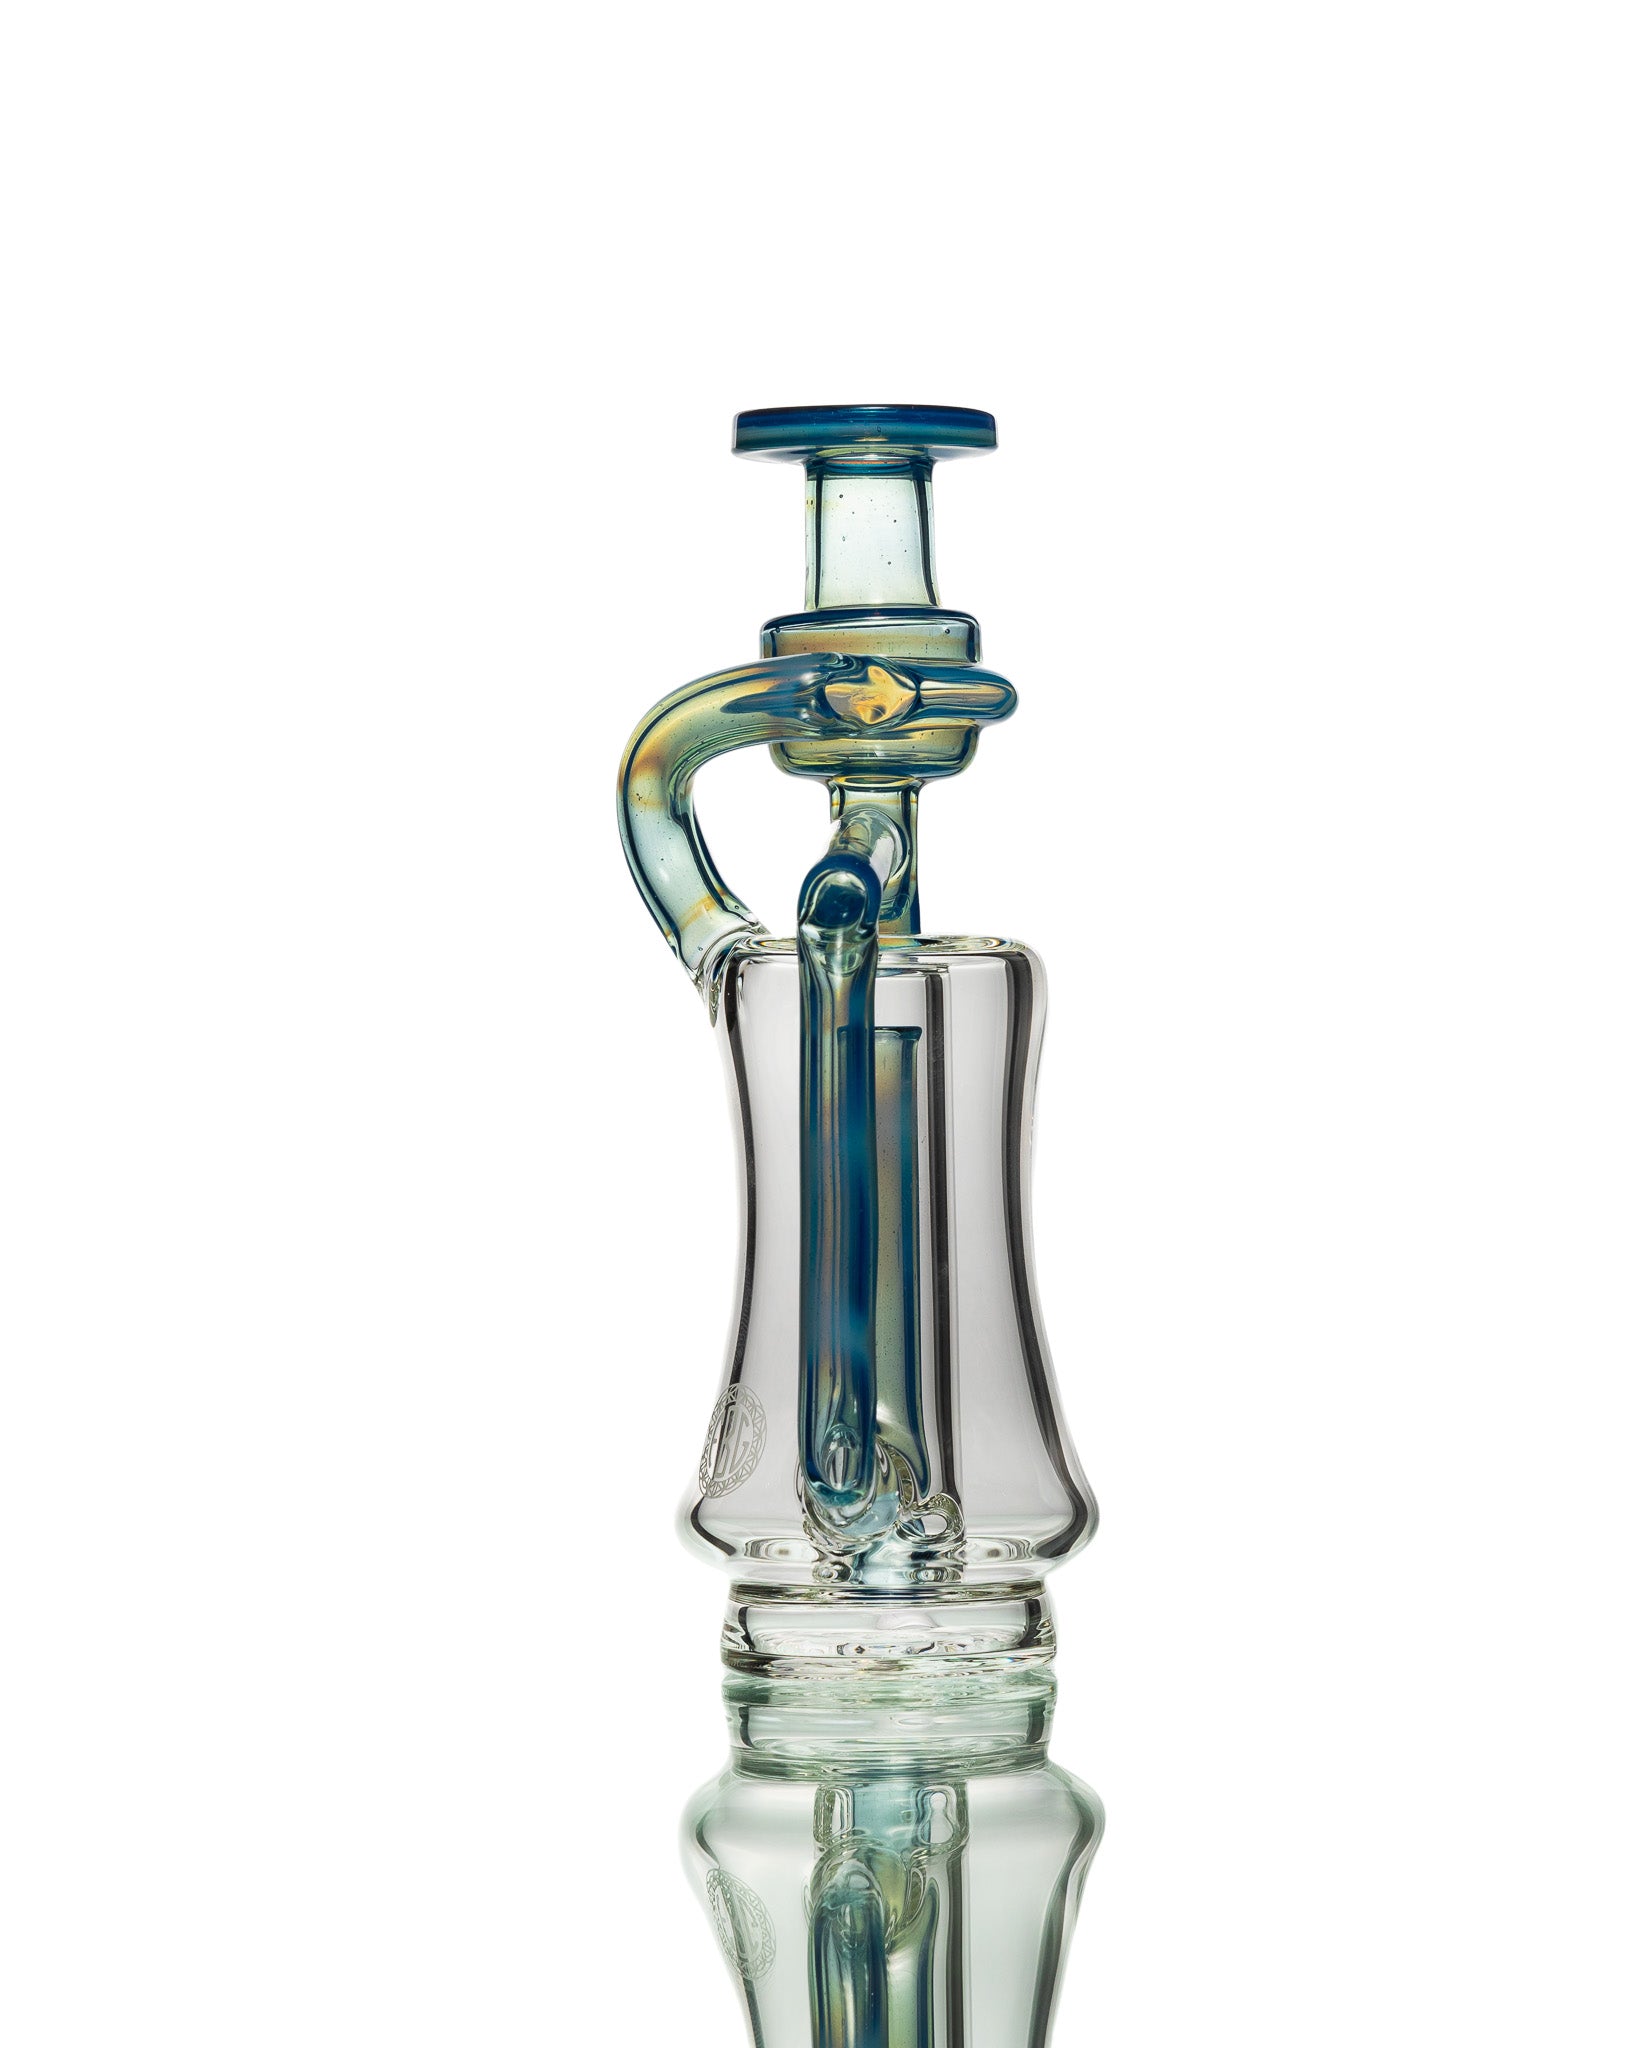 FatBoy Glass - "Blue Stardust over Ghost" Puffco Recycler